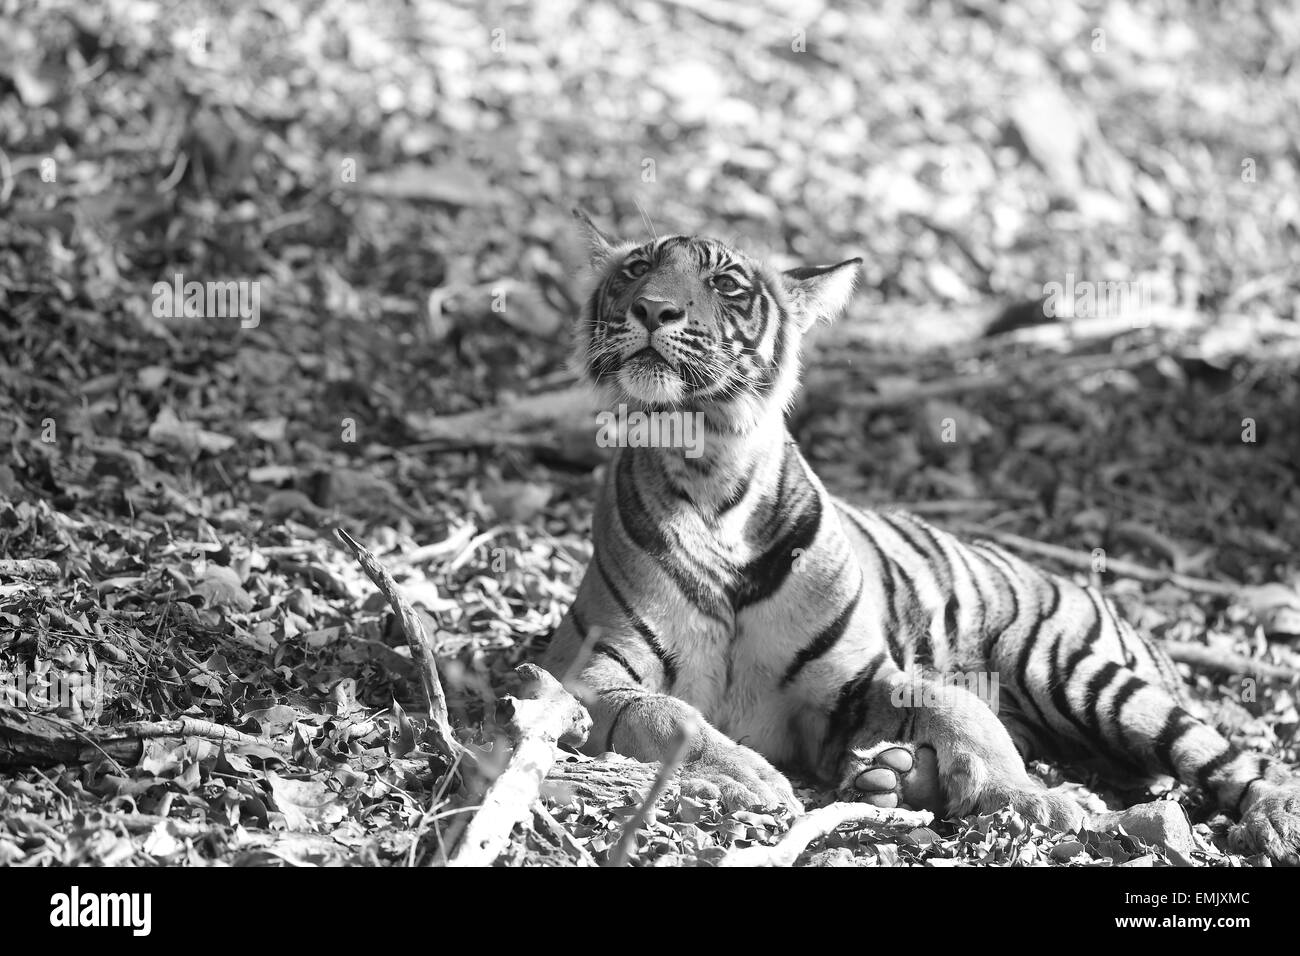 Indian wildlife tiger cub Black and White Stock Photos & Images - Alamy